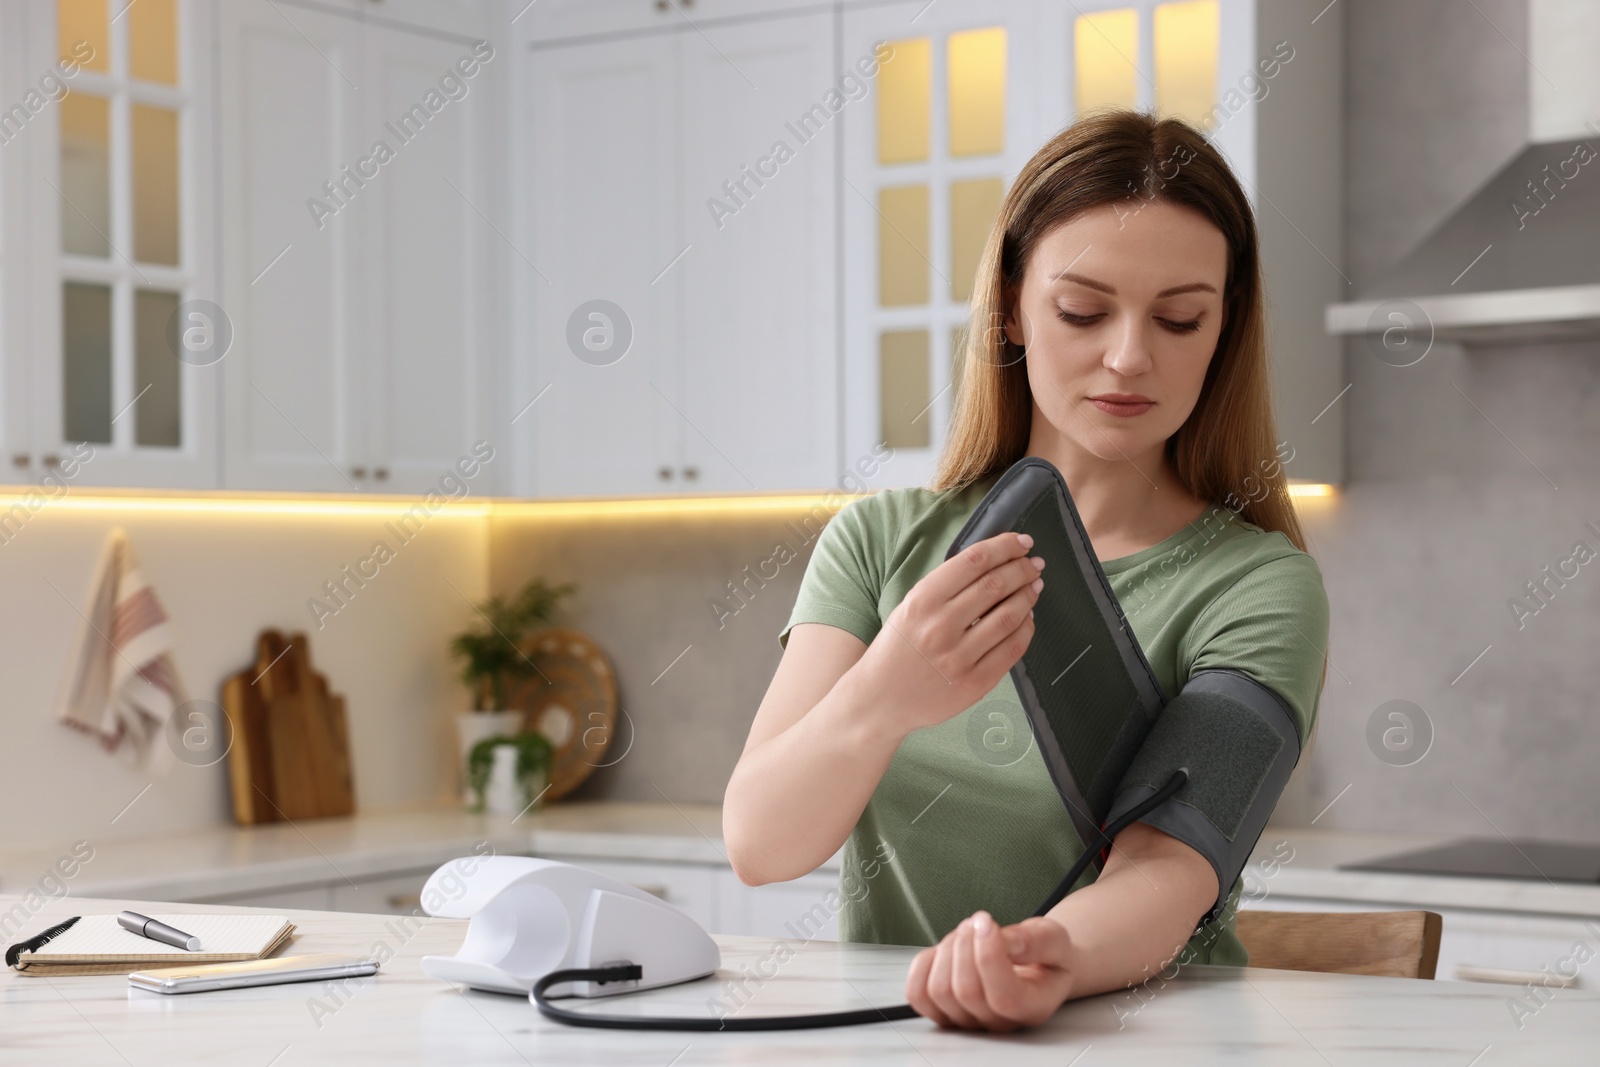 Photo of Woman measuring blood pressure in kitchen, space for text